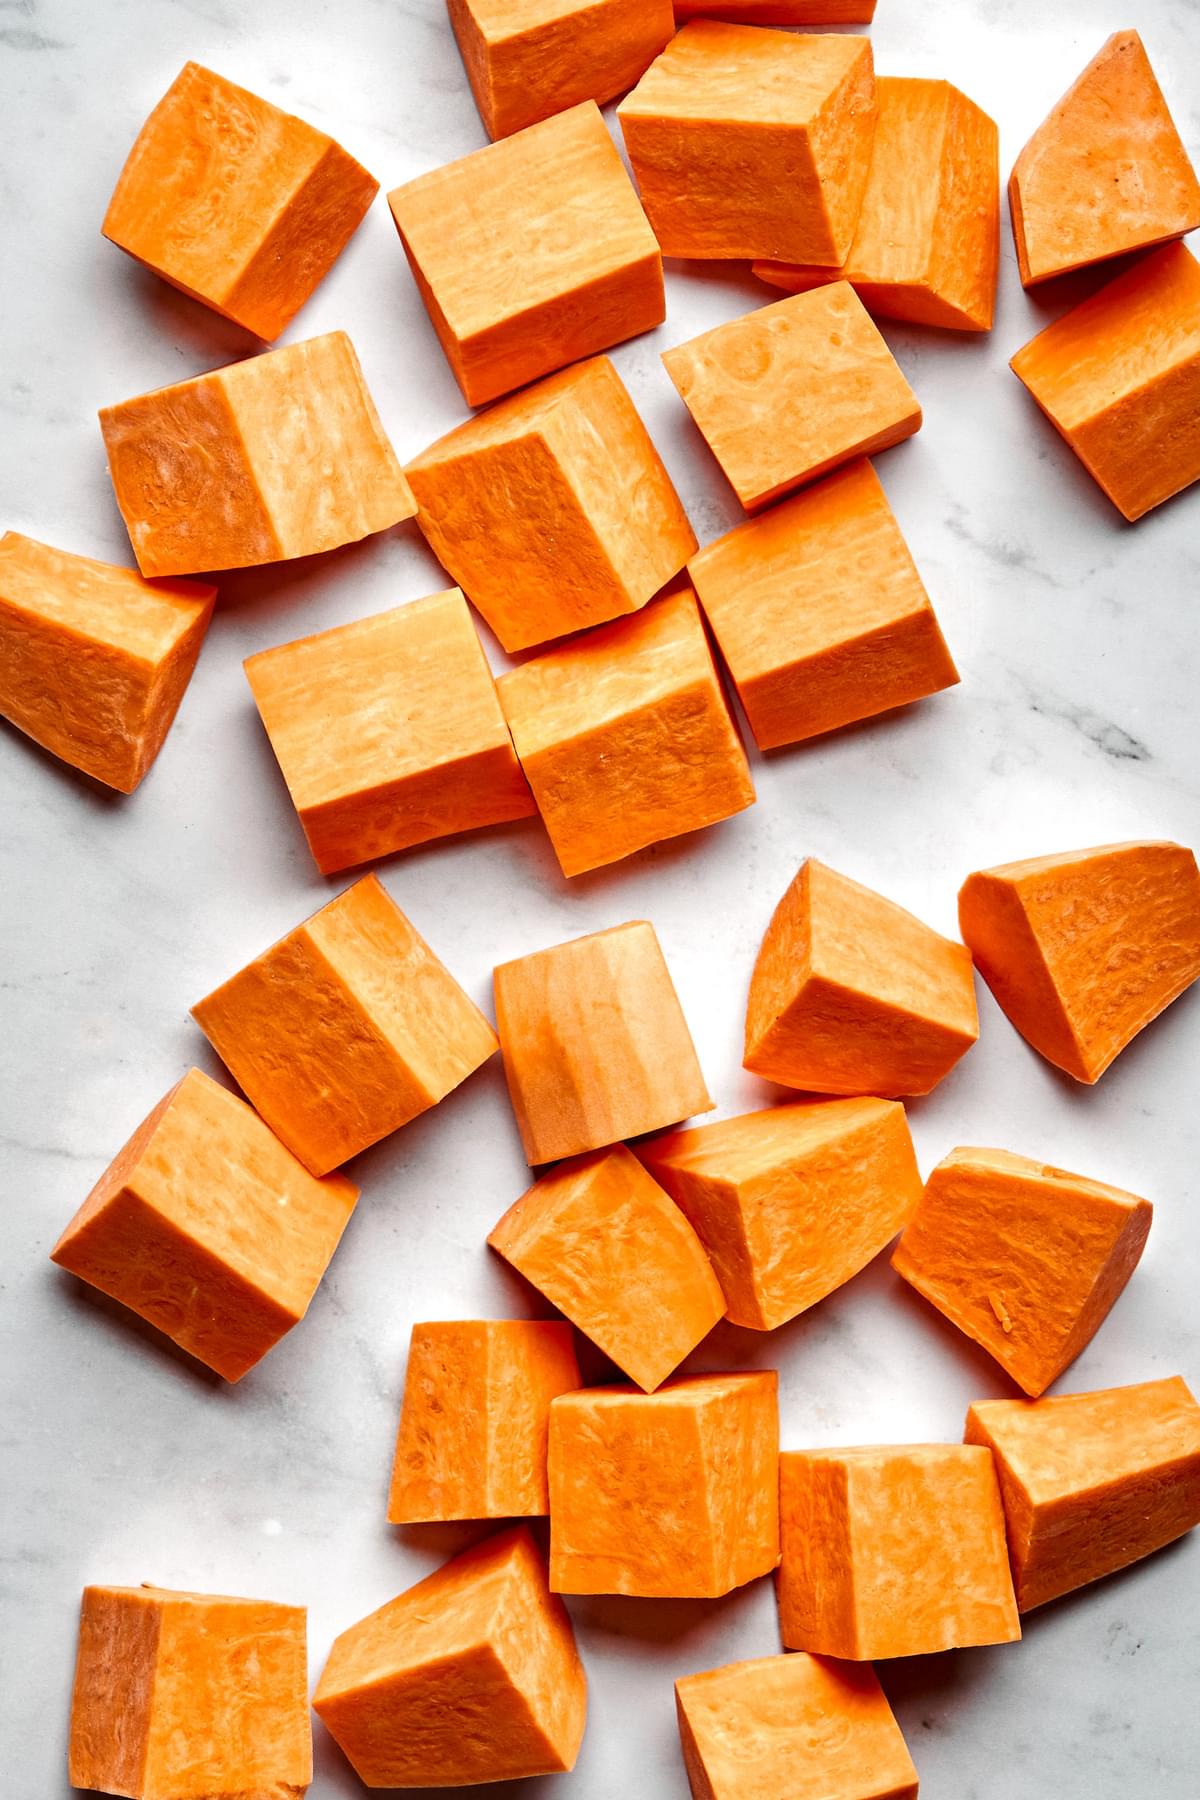 raw cubed sweet potatoes ready to be seasoned and roasted